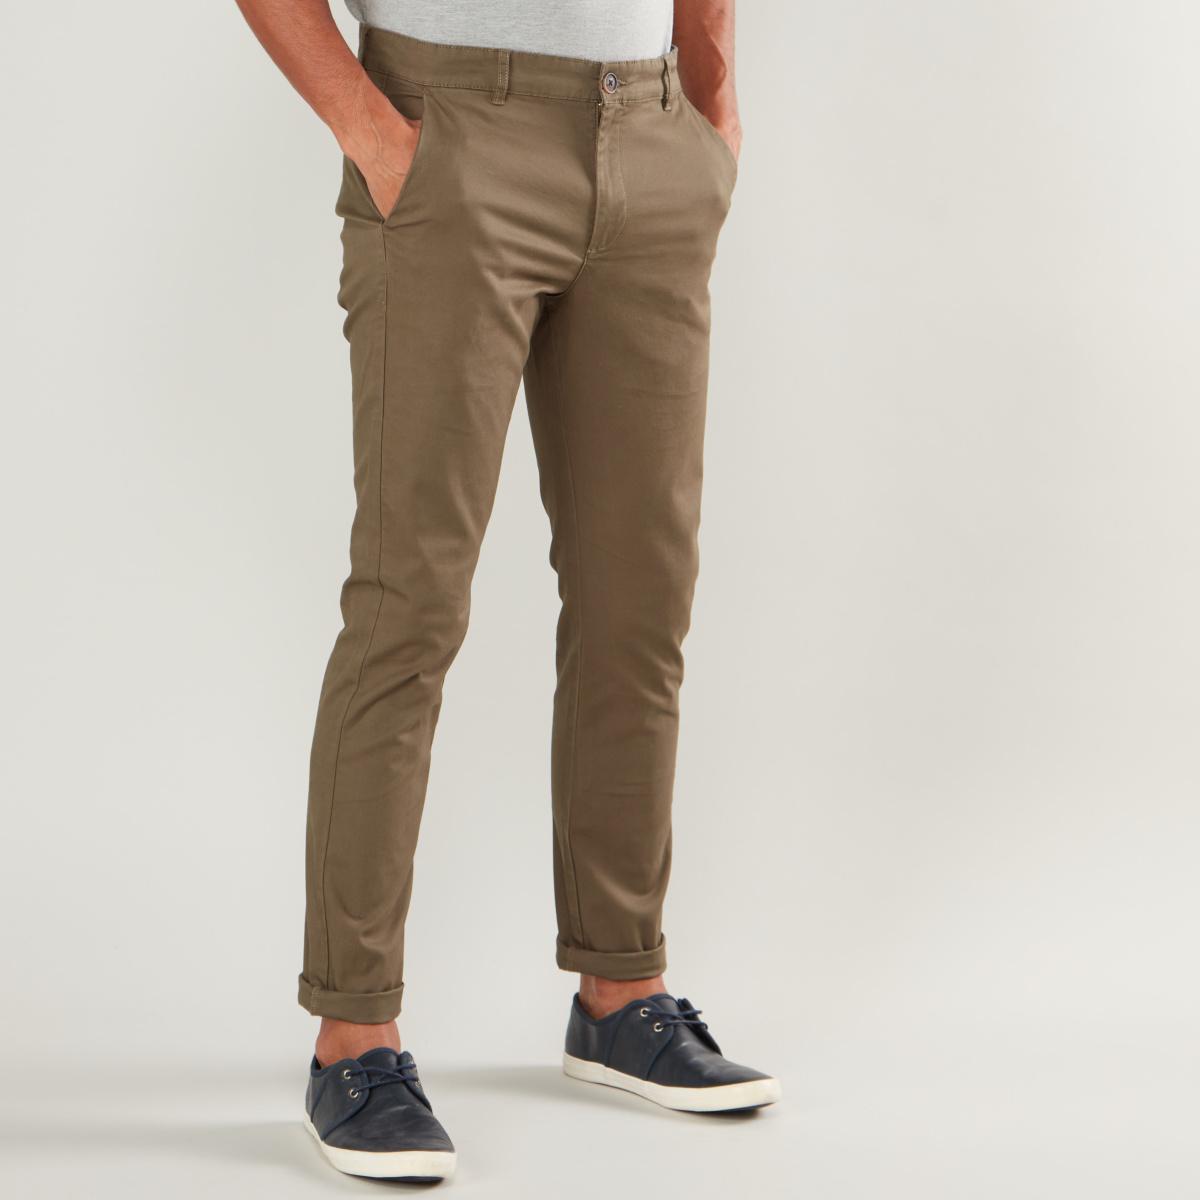 Skinny Fit Solid Chinos with Belt Loops and Pocket Detail